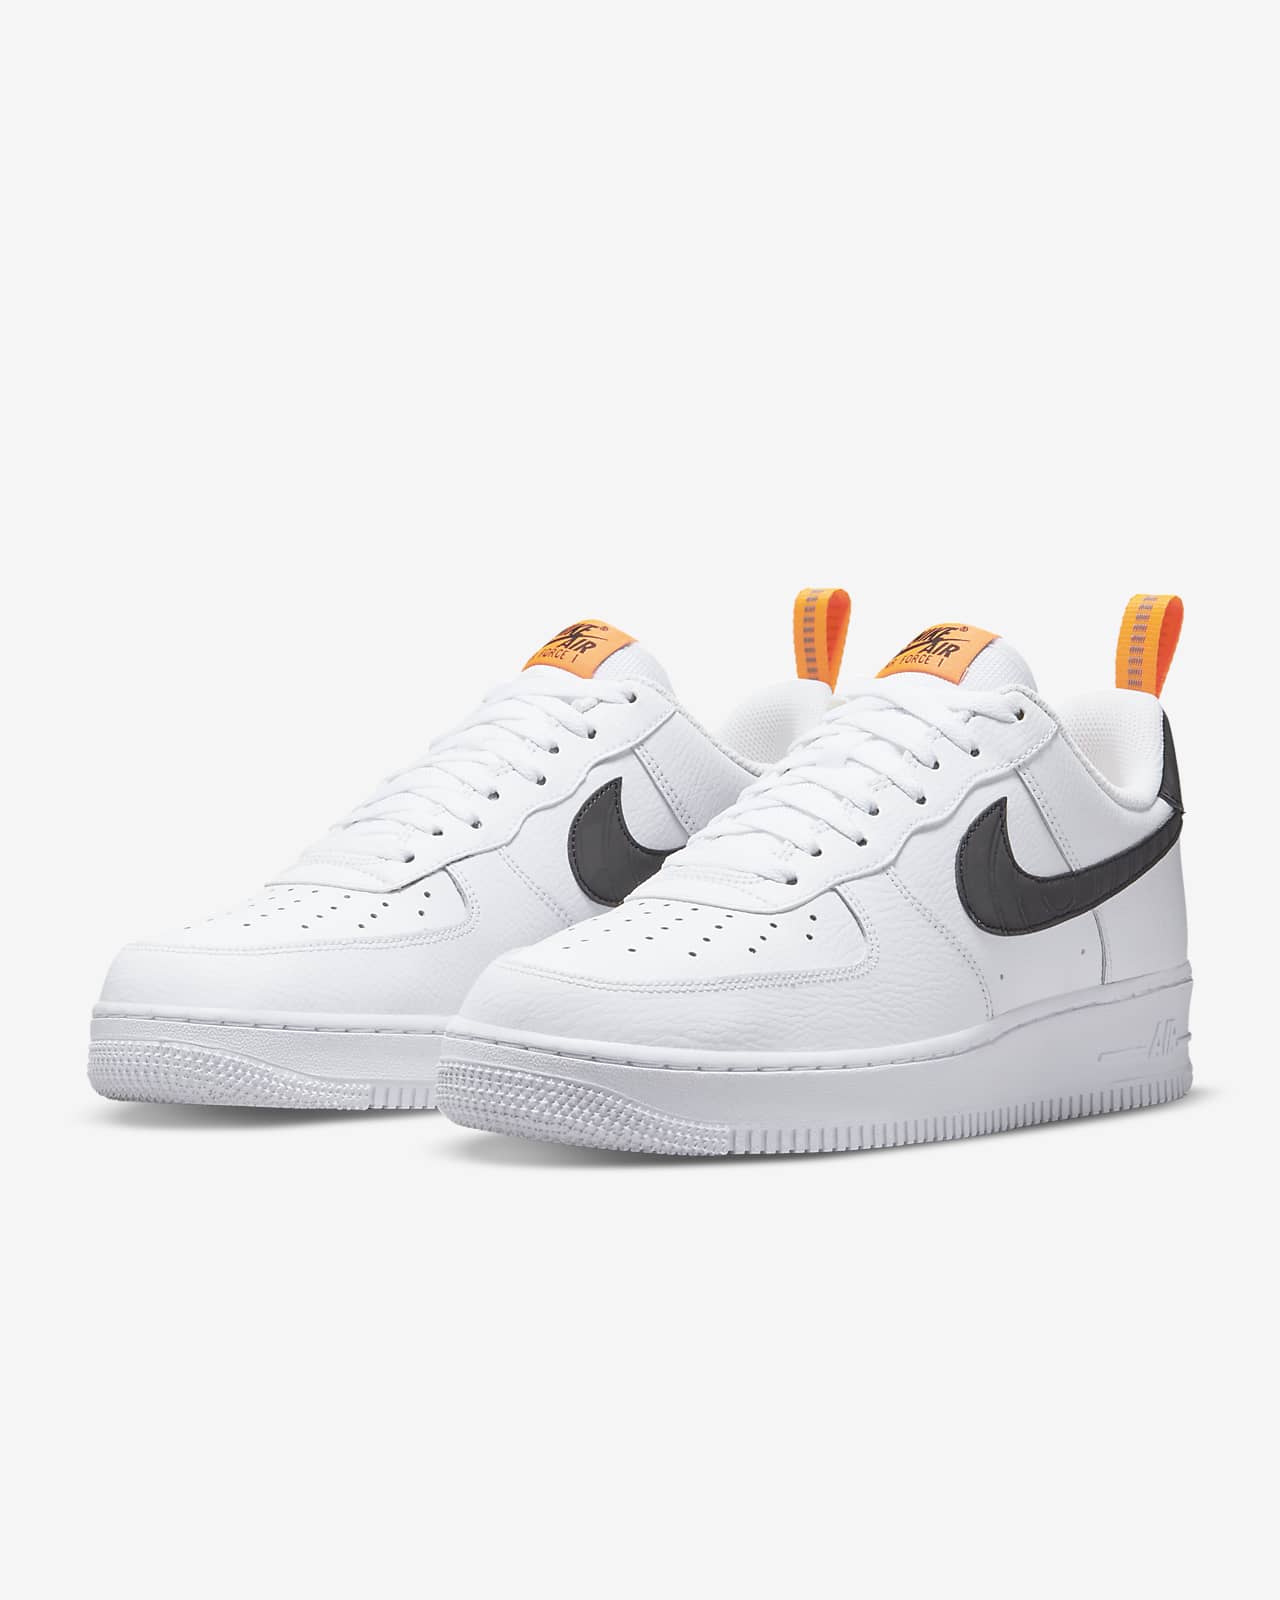 air force 1 uomo personalizzate